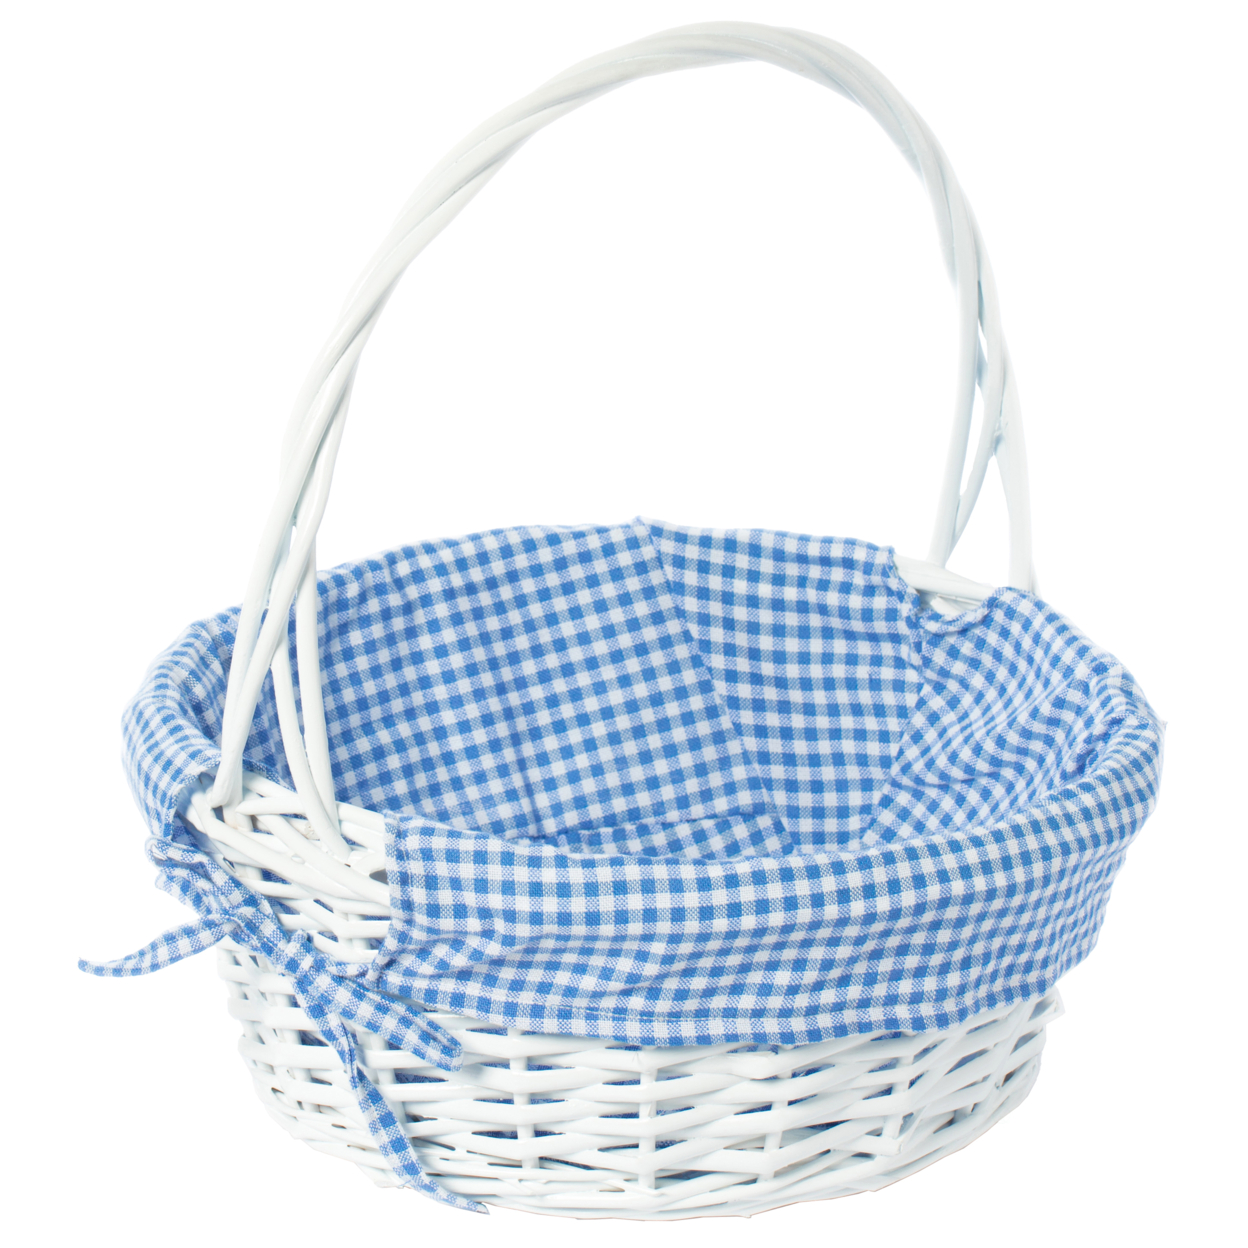 White Round Willow Gift Basket, With Blue And White Gingham Liner And Handles - Blue Medium